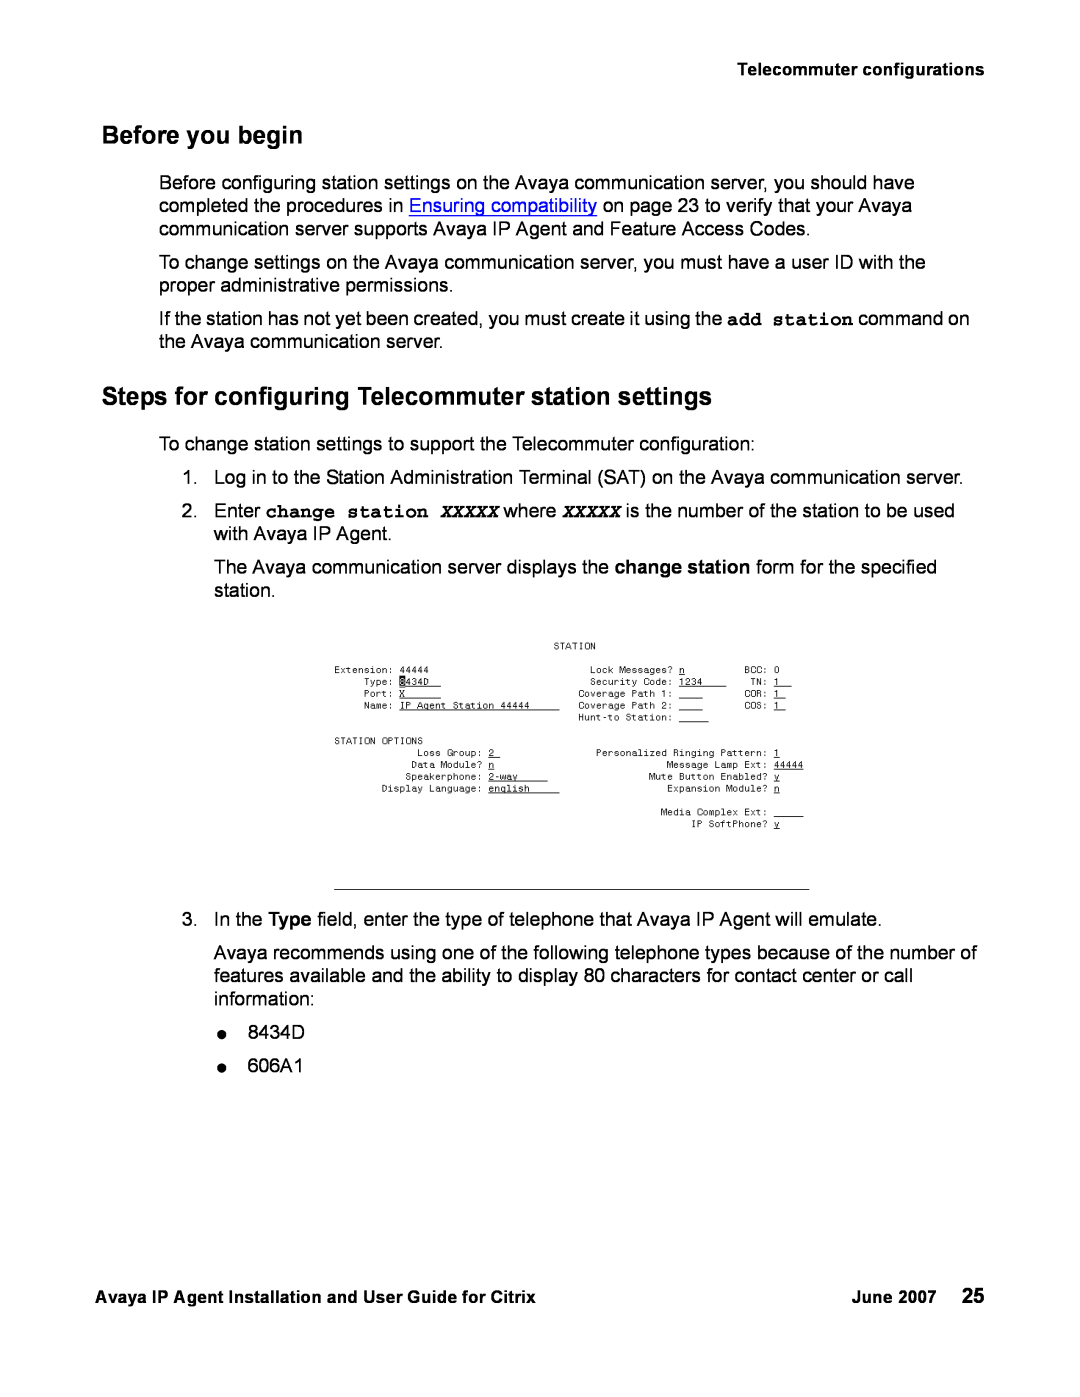 Avaya 7 manual Steps for configuring Telecommuter station settings, Before you begin 